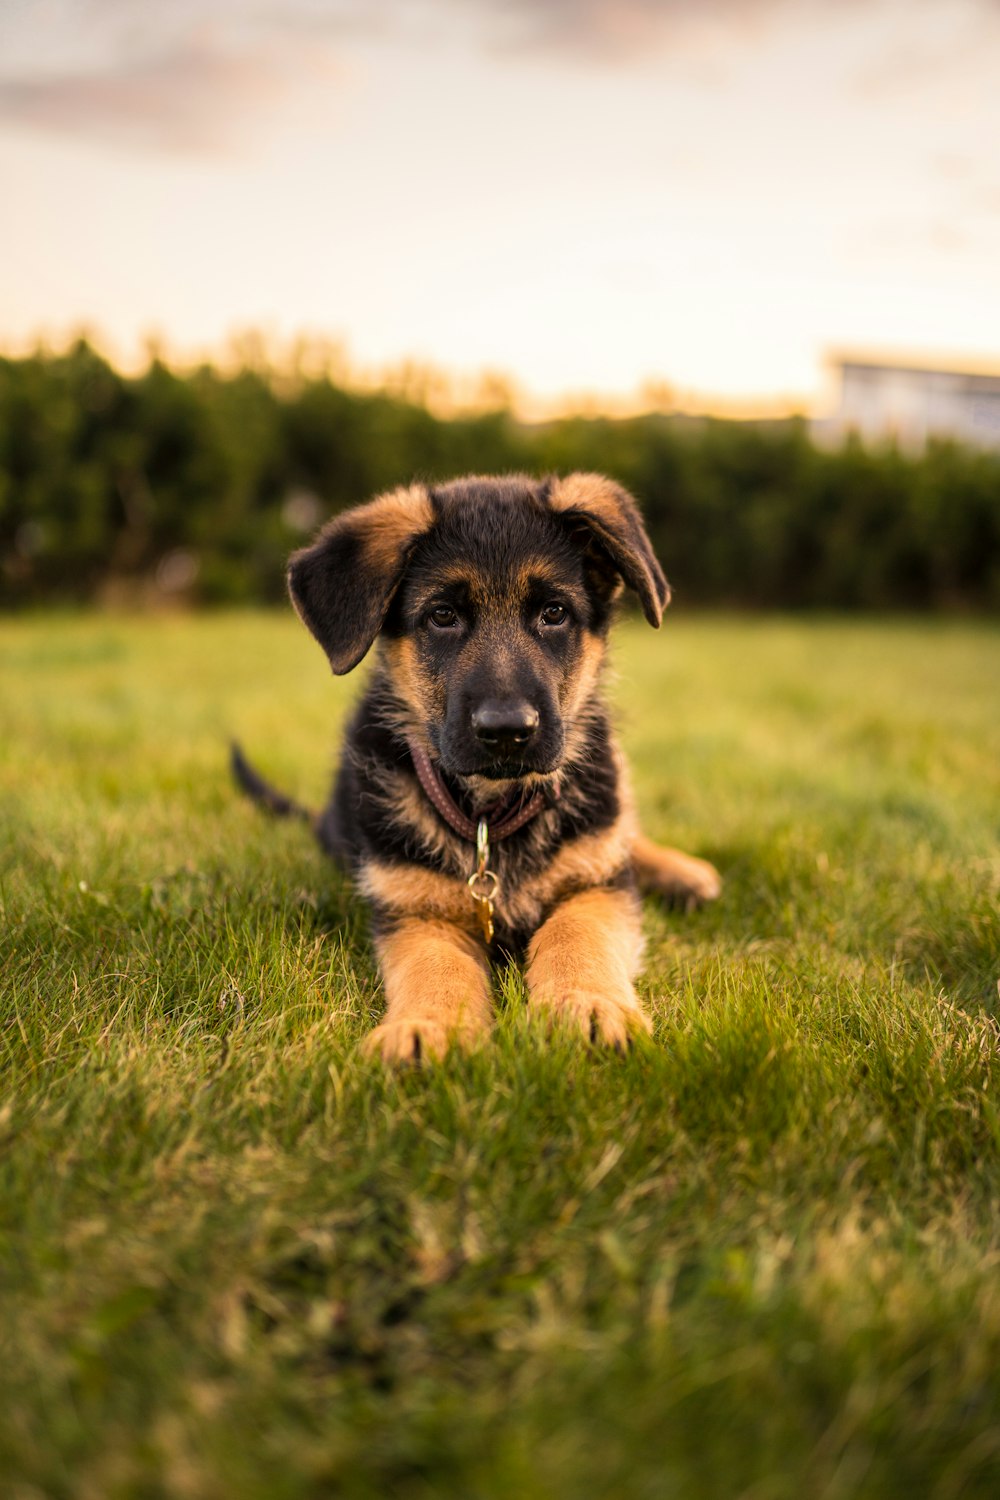 Puppy Dog Pictures | Download Free Images on Unsplash